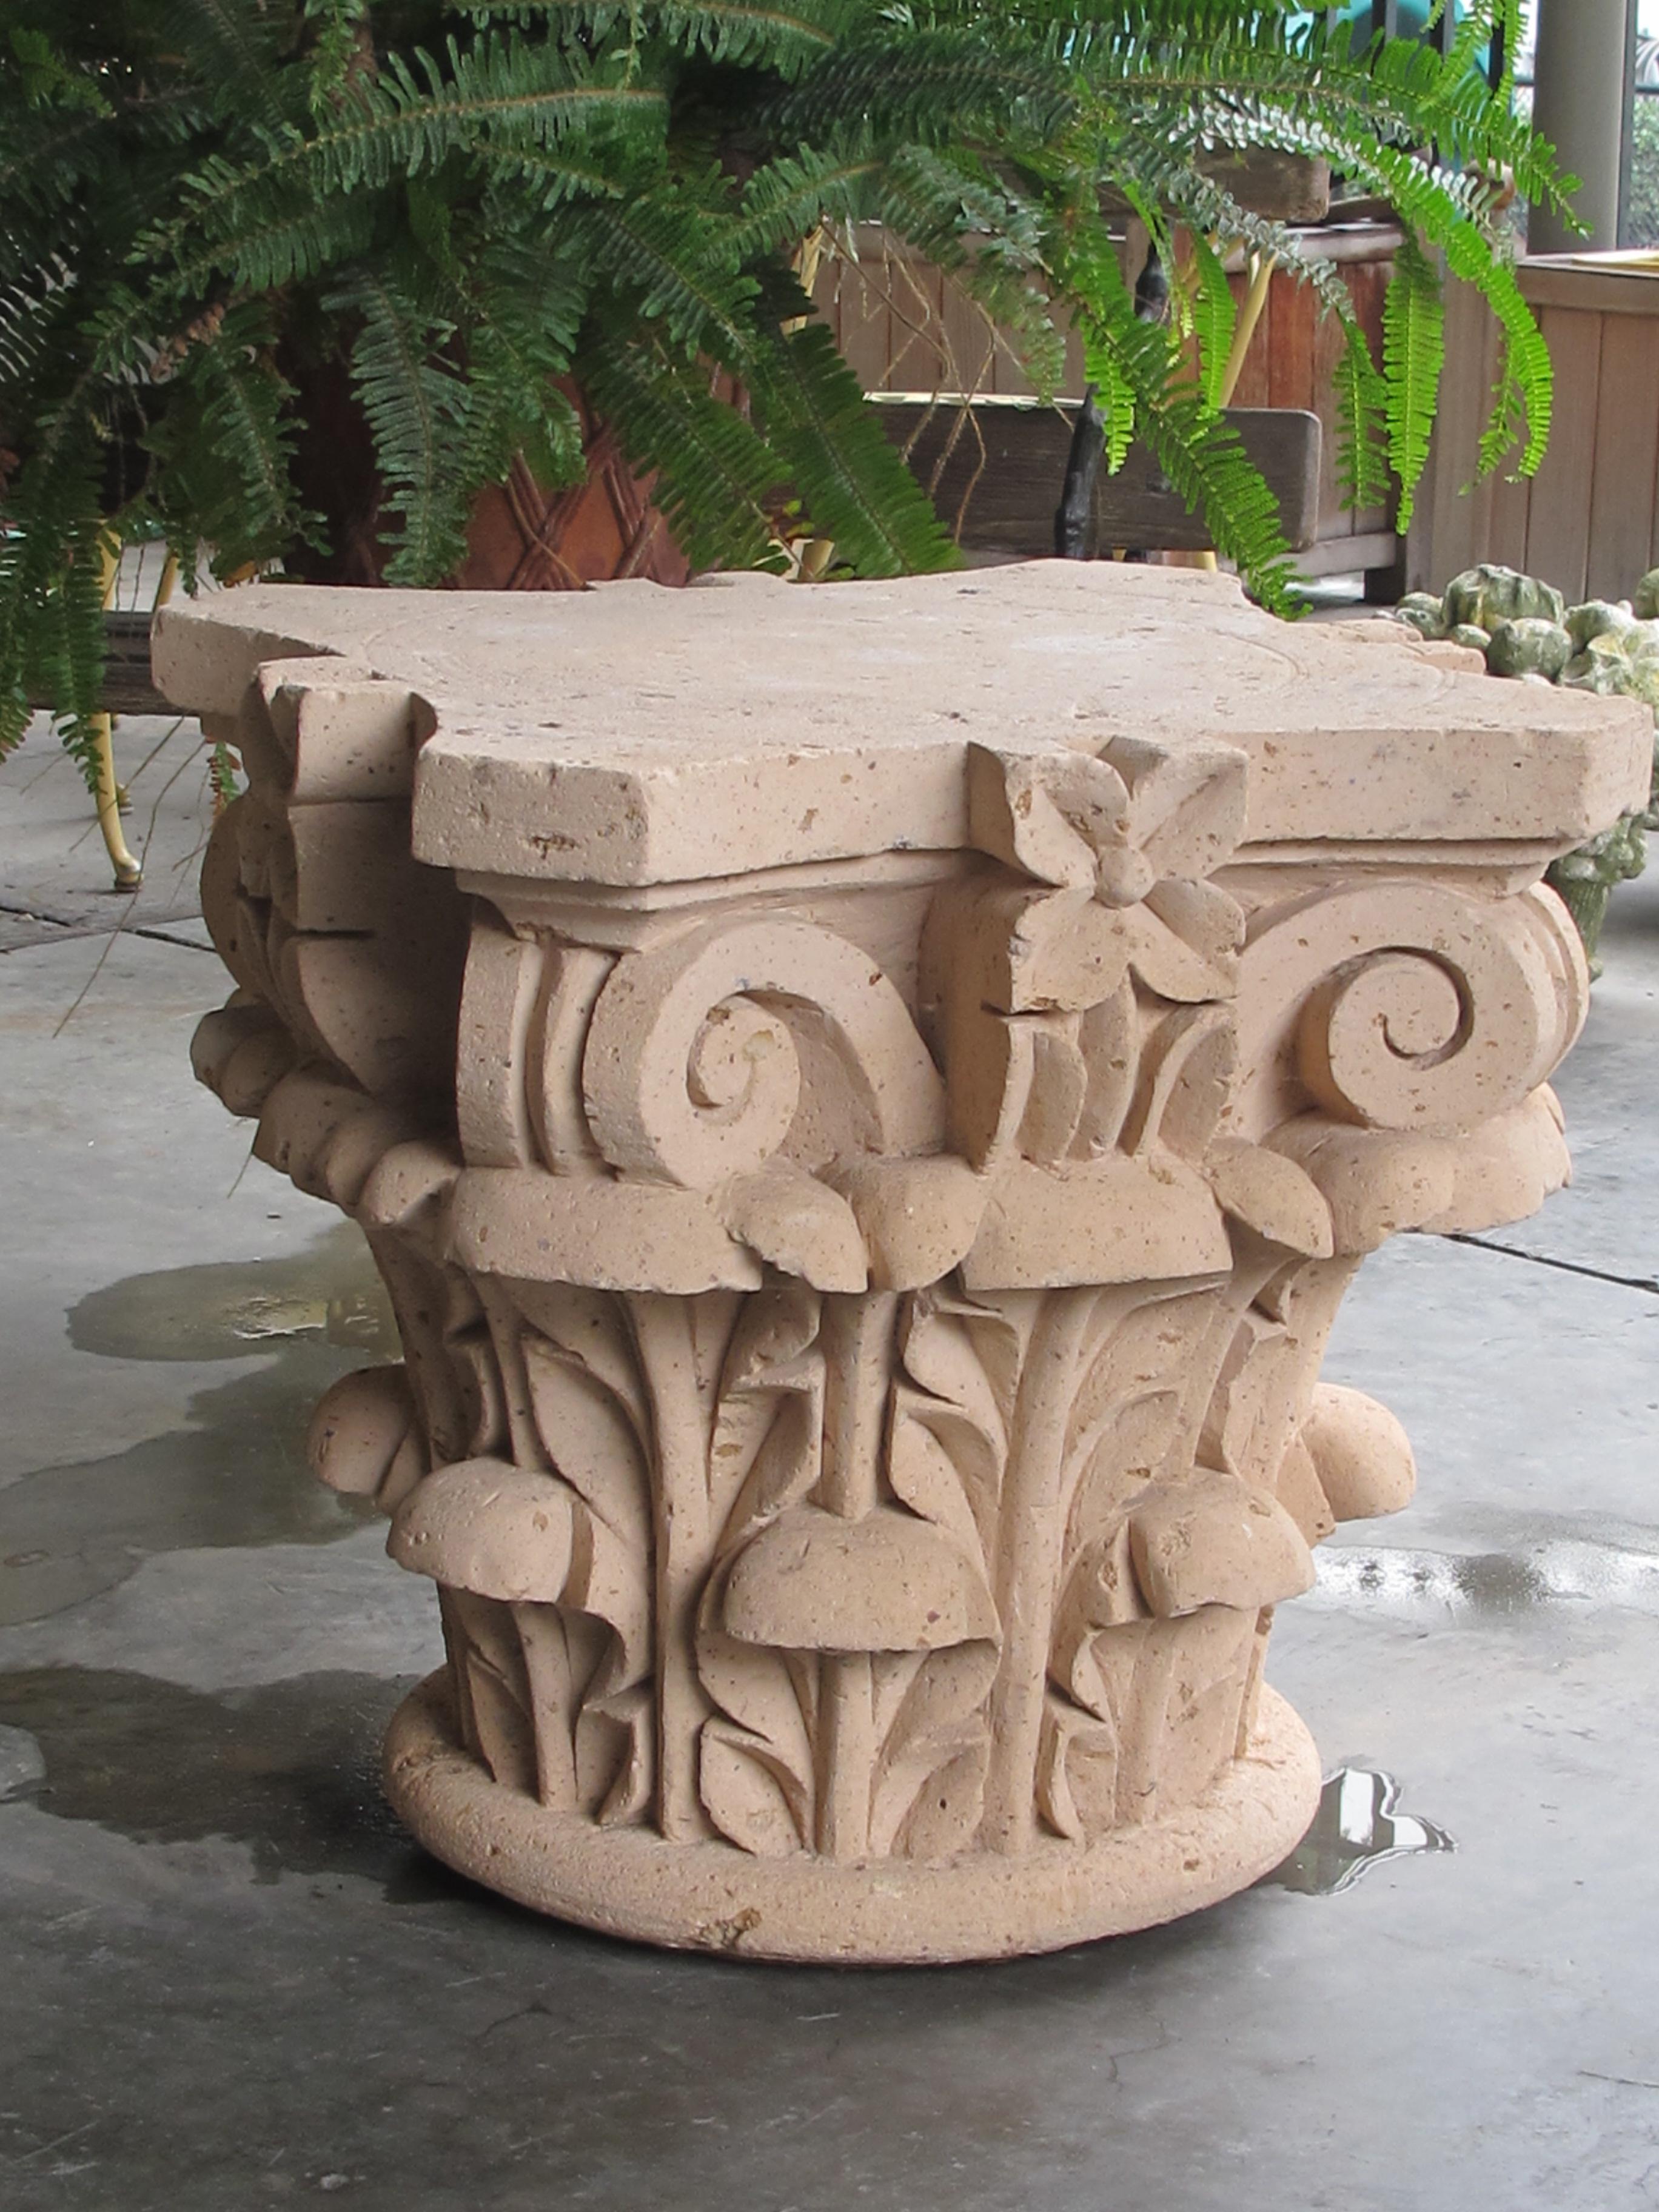 Each handcrafted capital carved from quarried cantera stone, a strong but malleable volcanic ash stone.